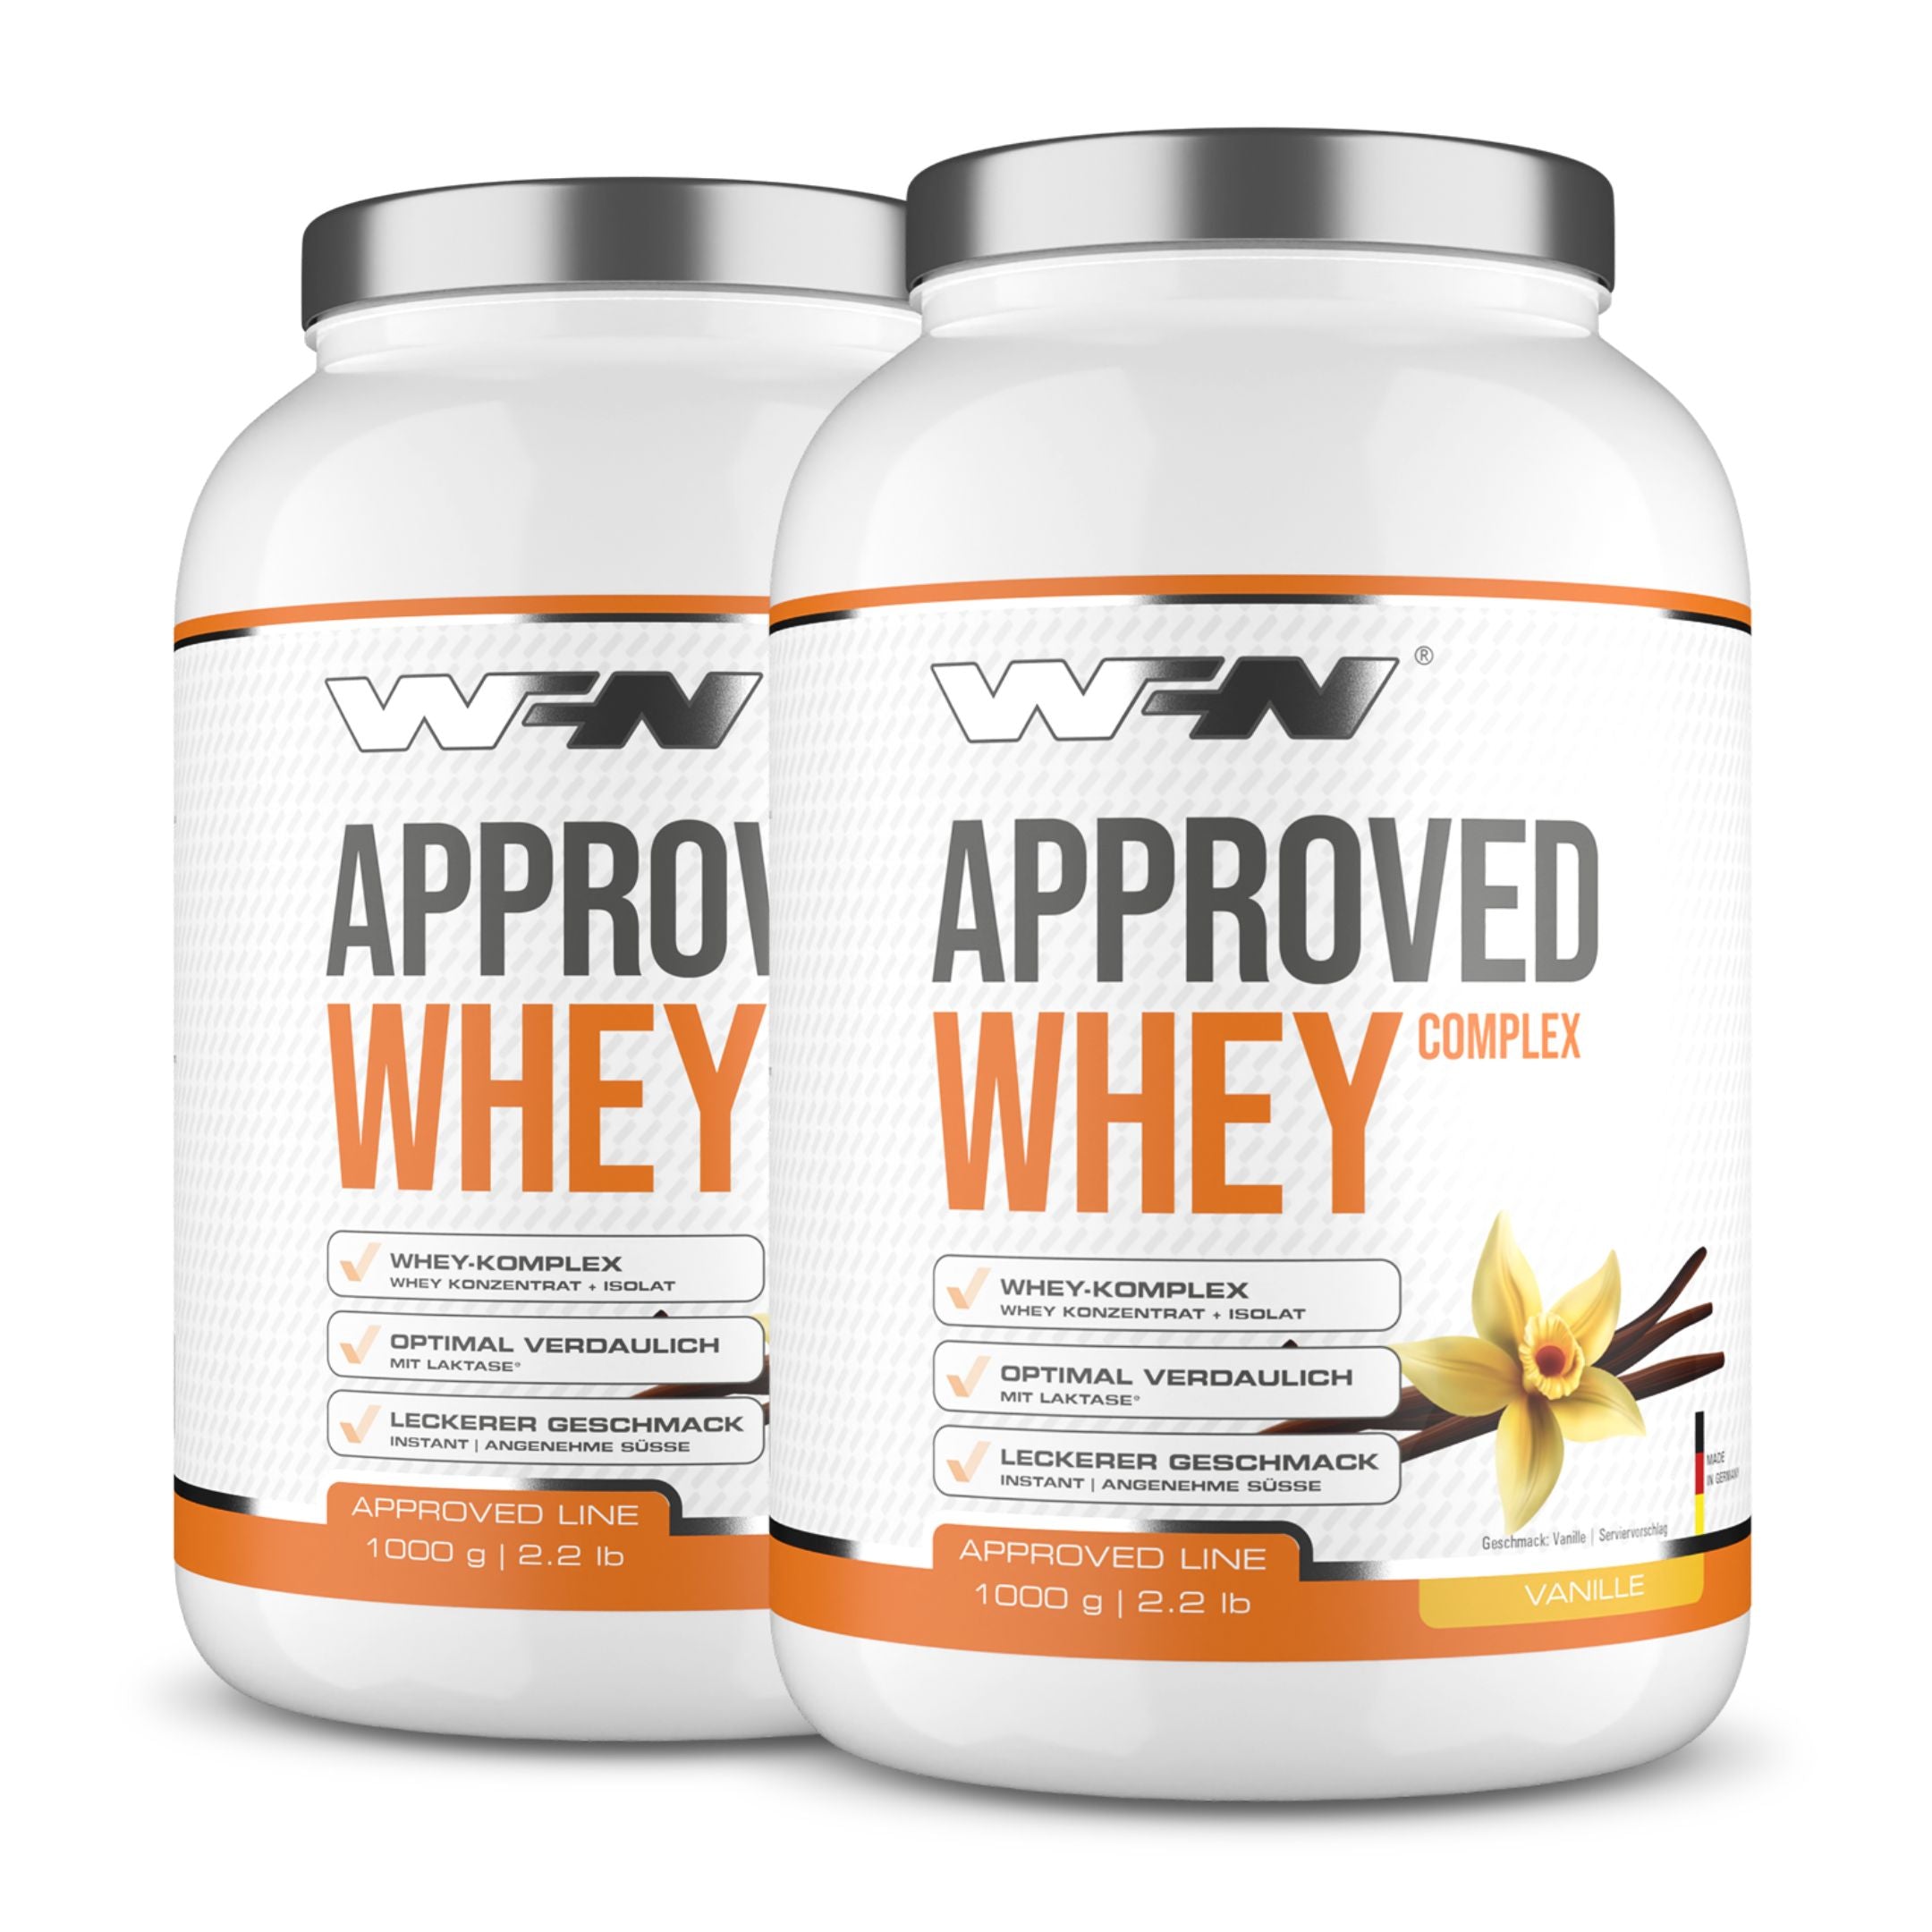 Approved Whey